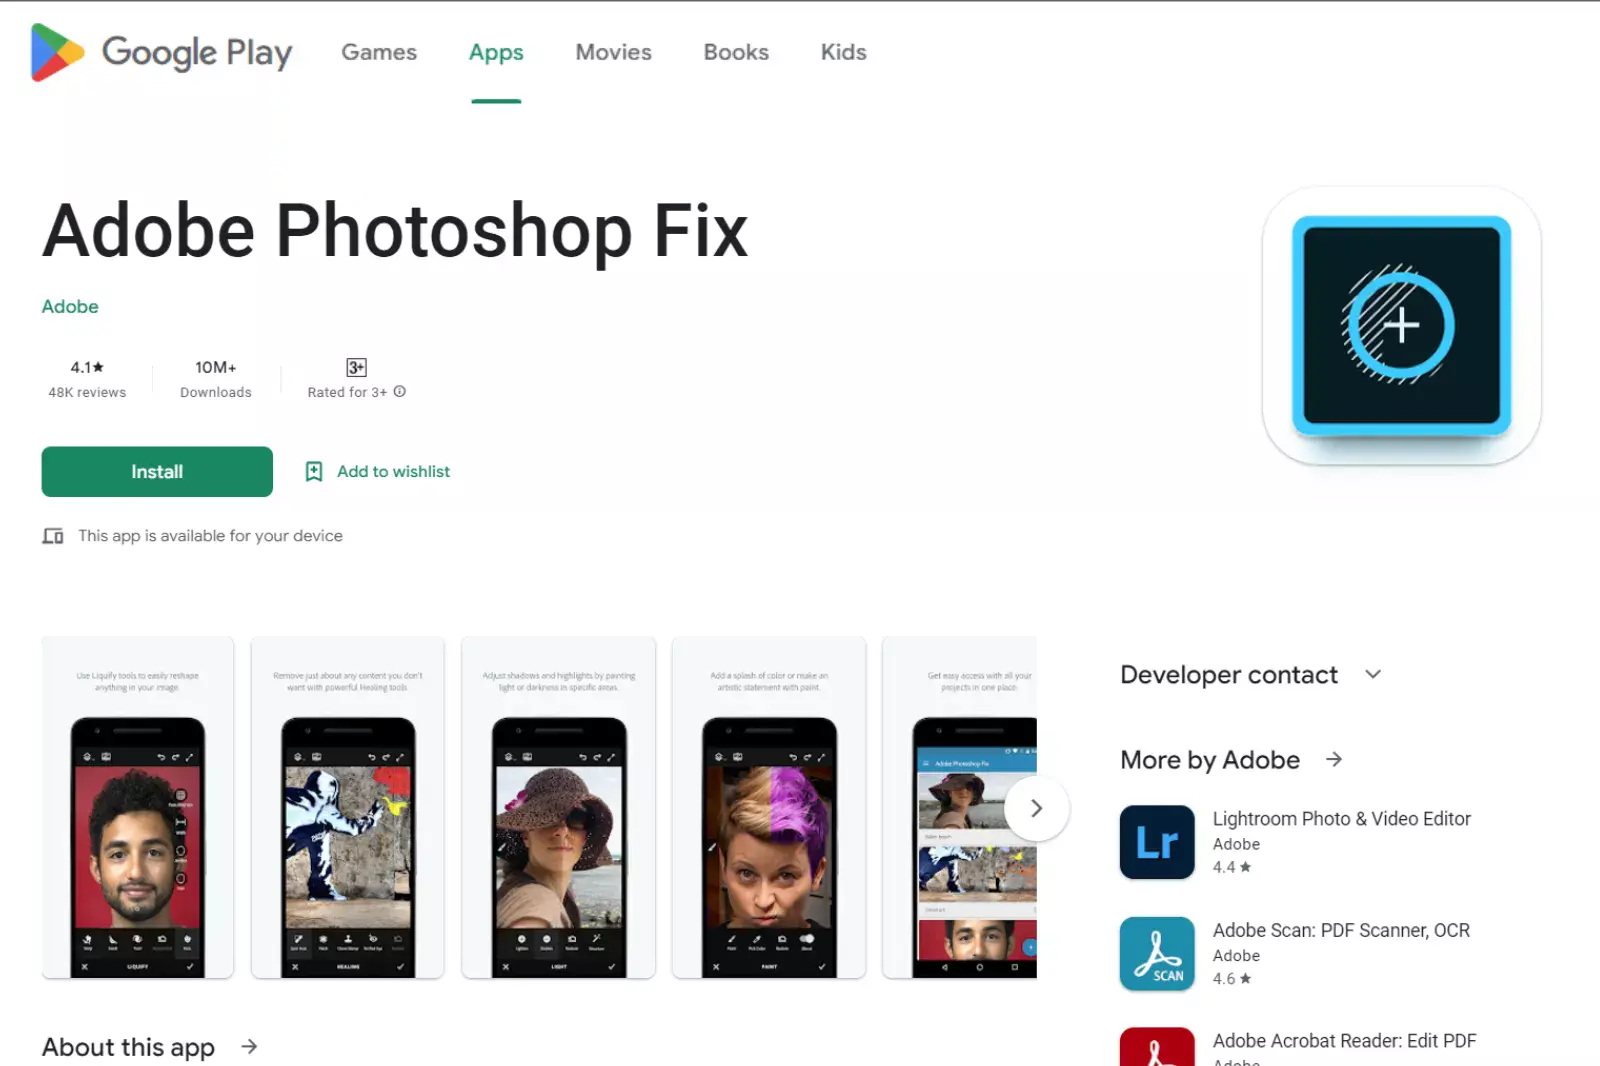 Home Page of Adobe Photoshop Fix